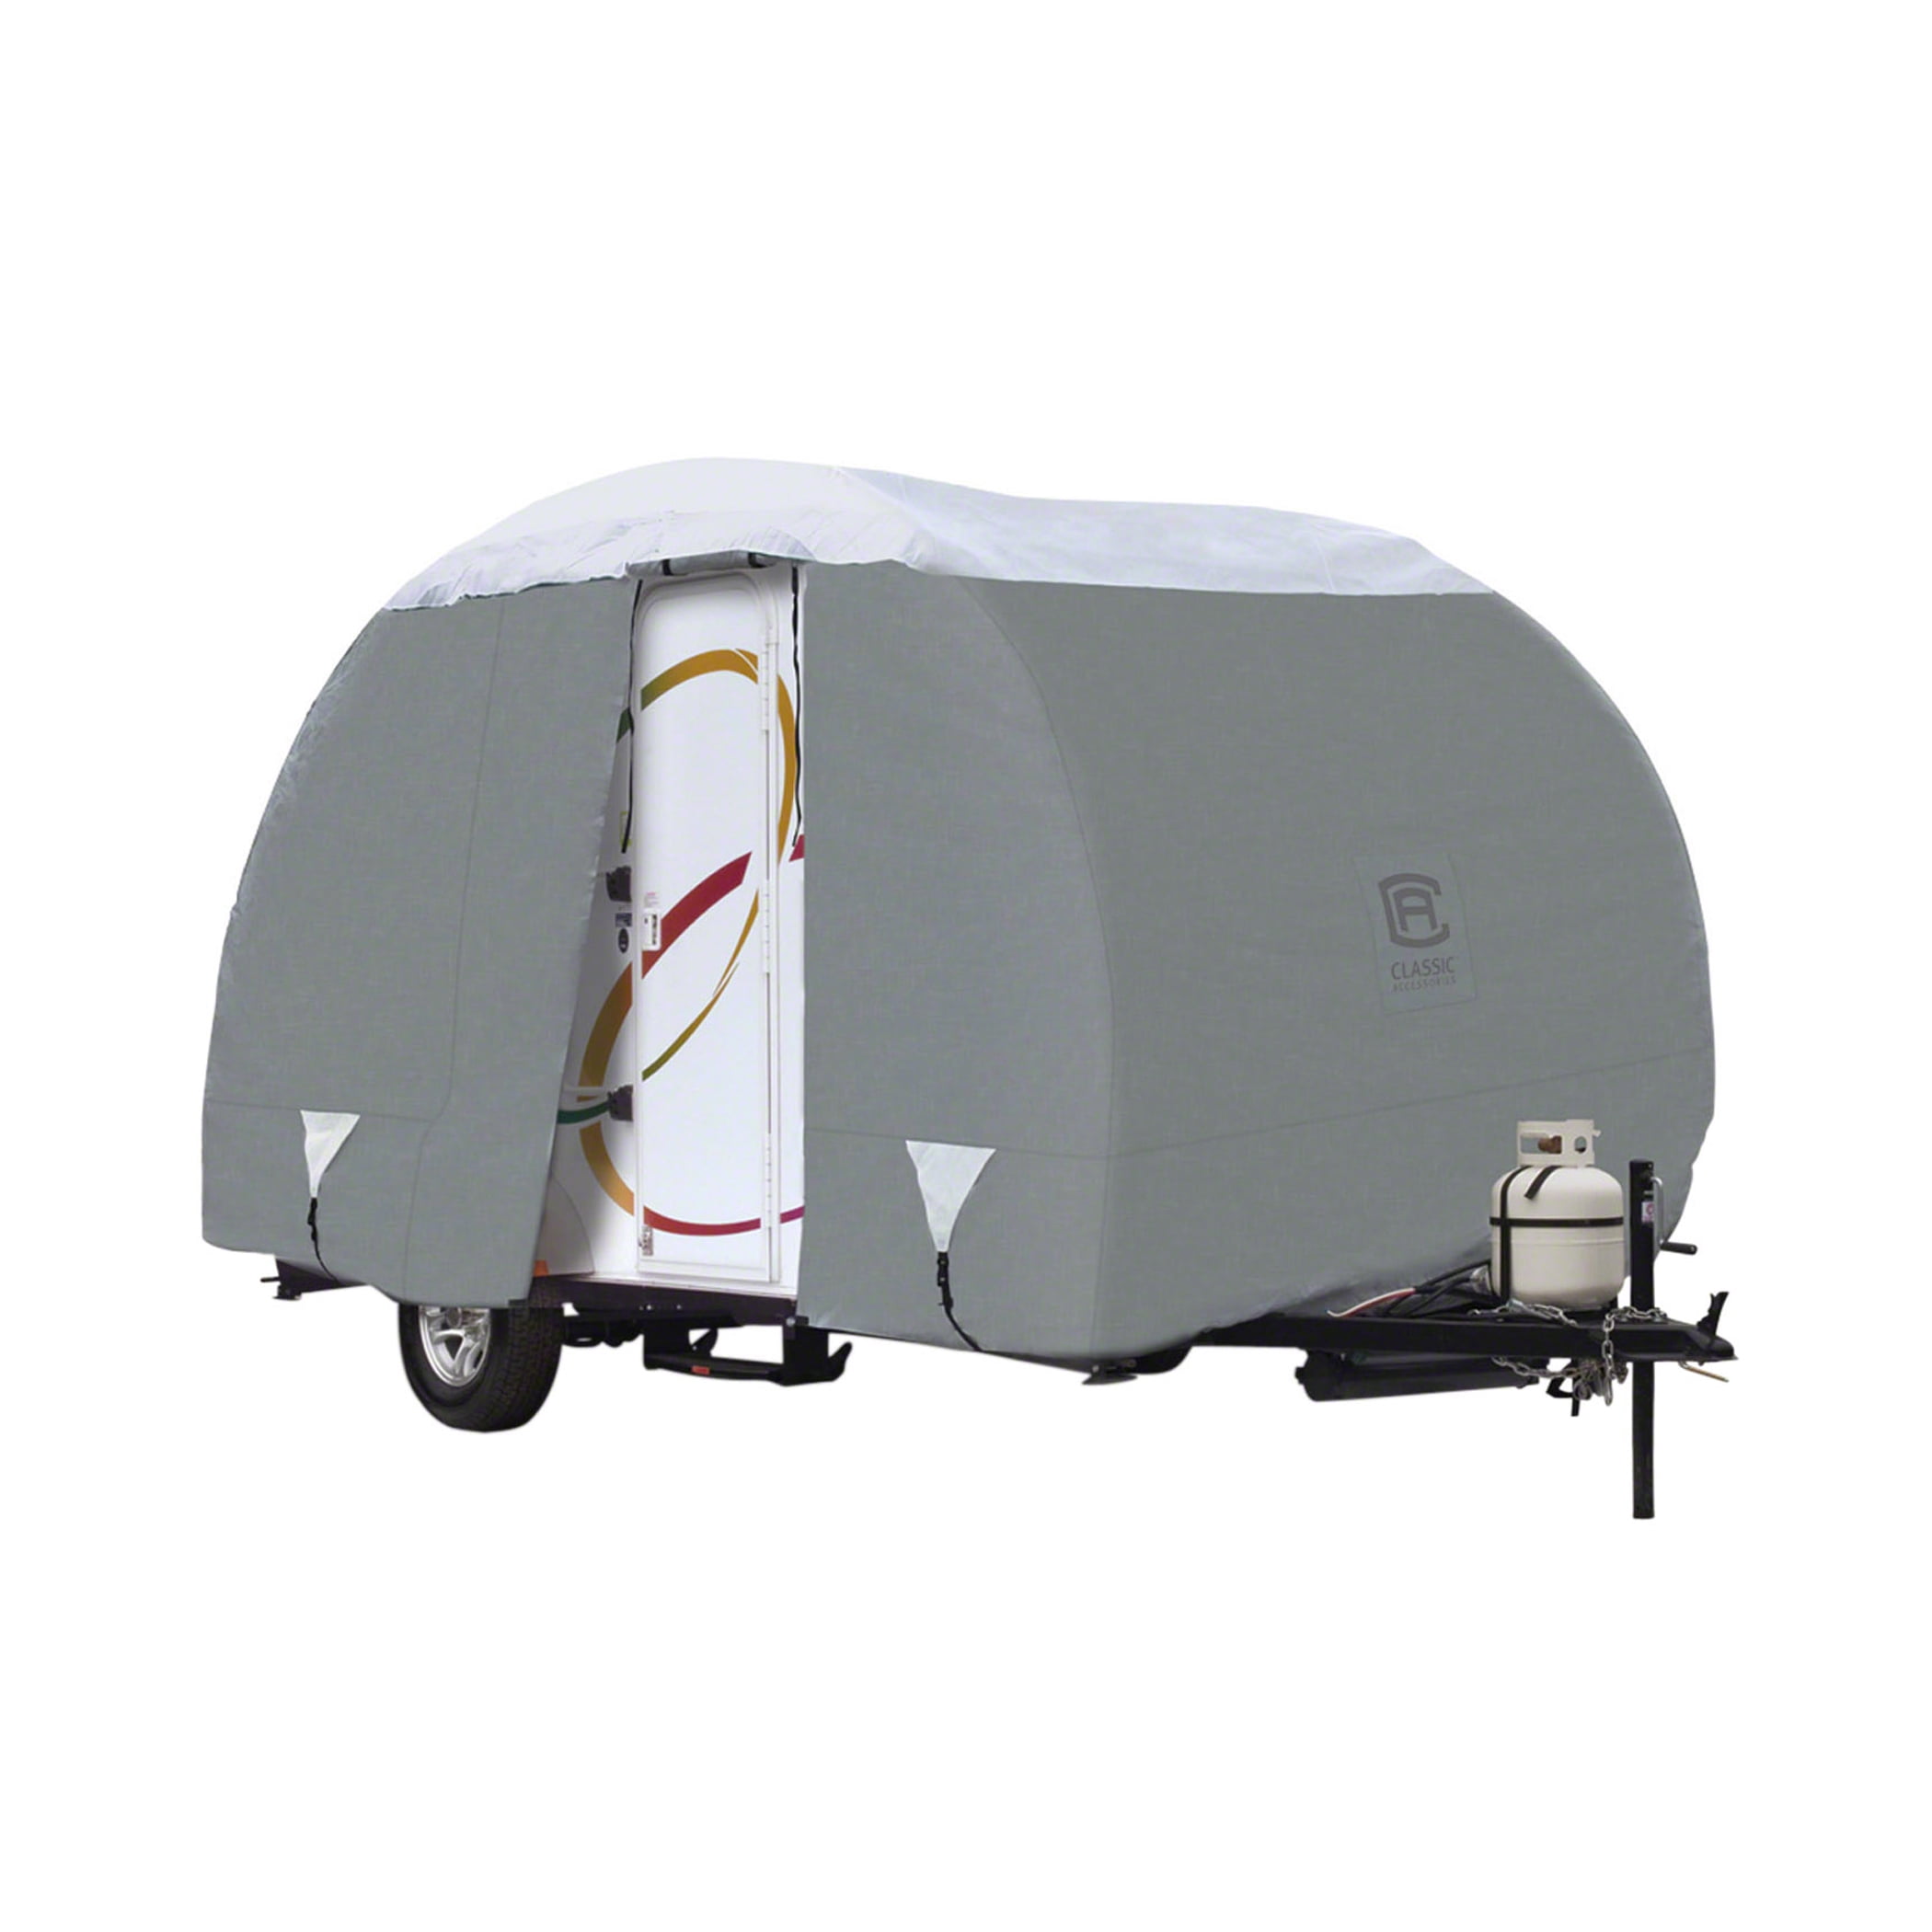 Seamander RV Cover Travel Trailer Extra Thick Triple-ply Top Panel Beige, Fits 20-22Trailers 